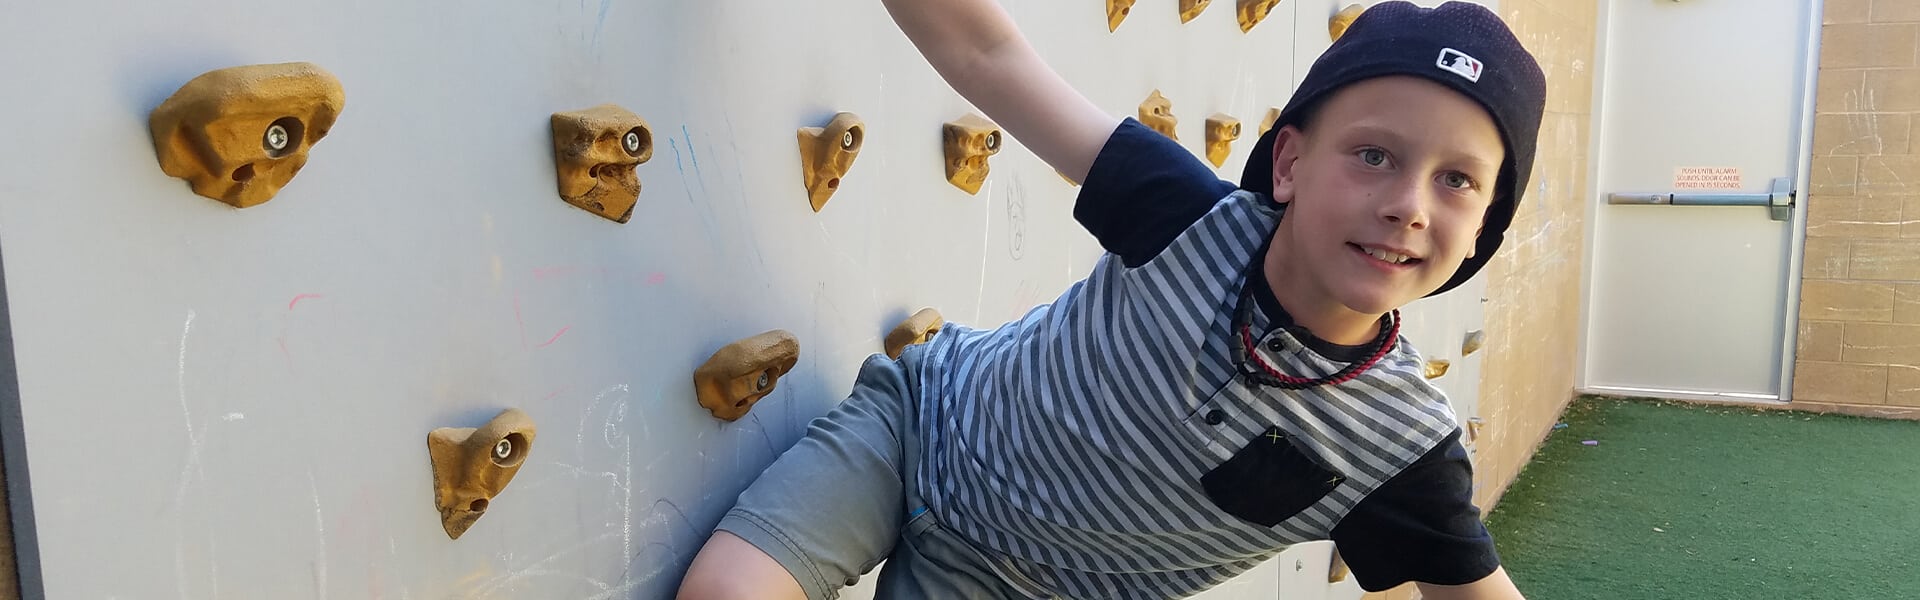 Boy climbing wall / Other ways to give image